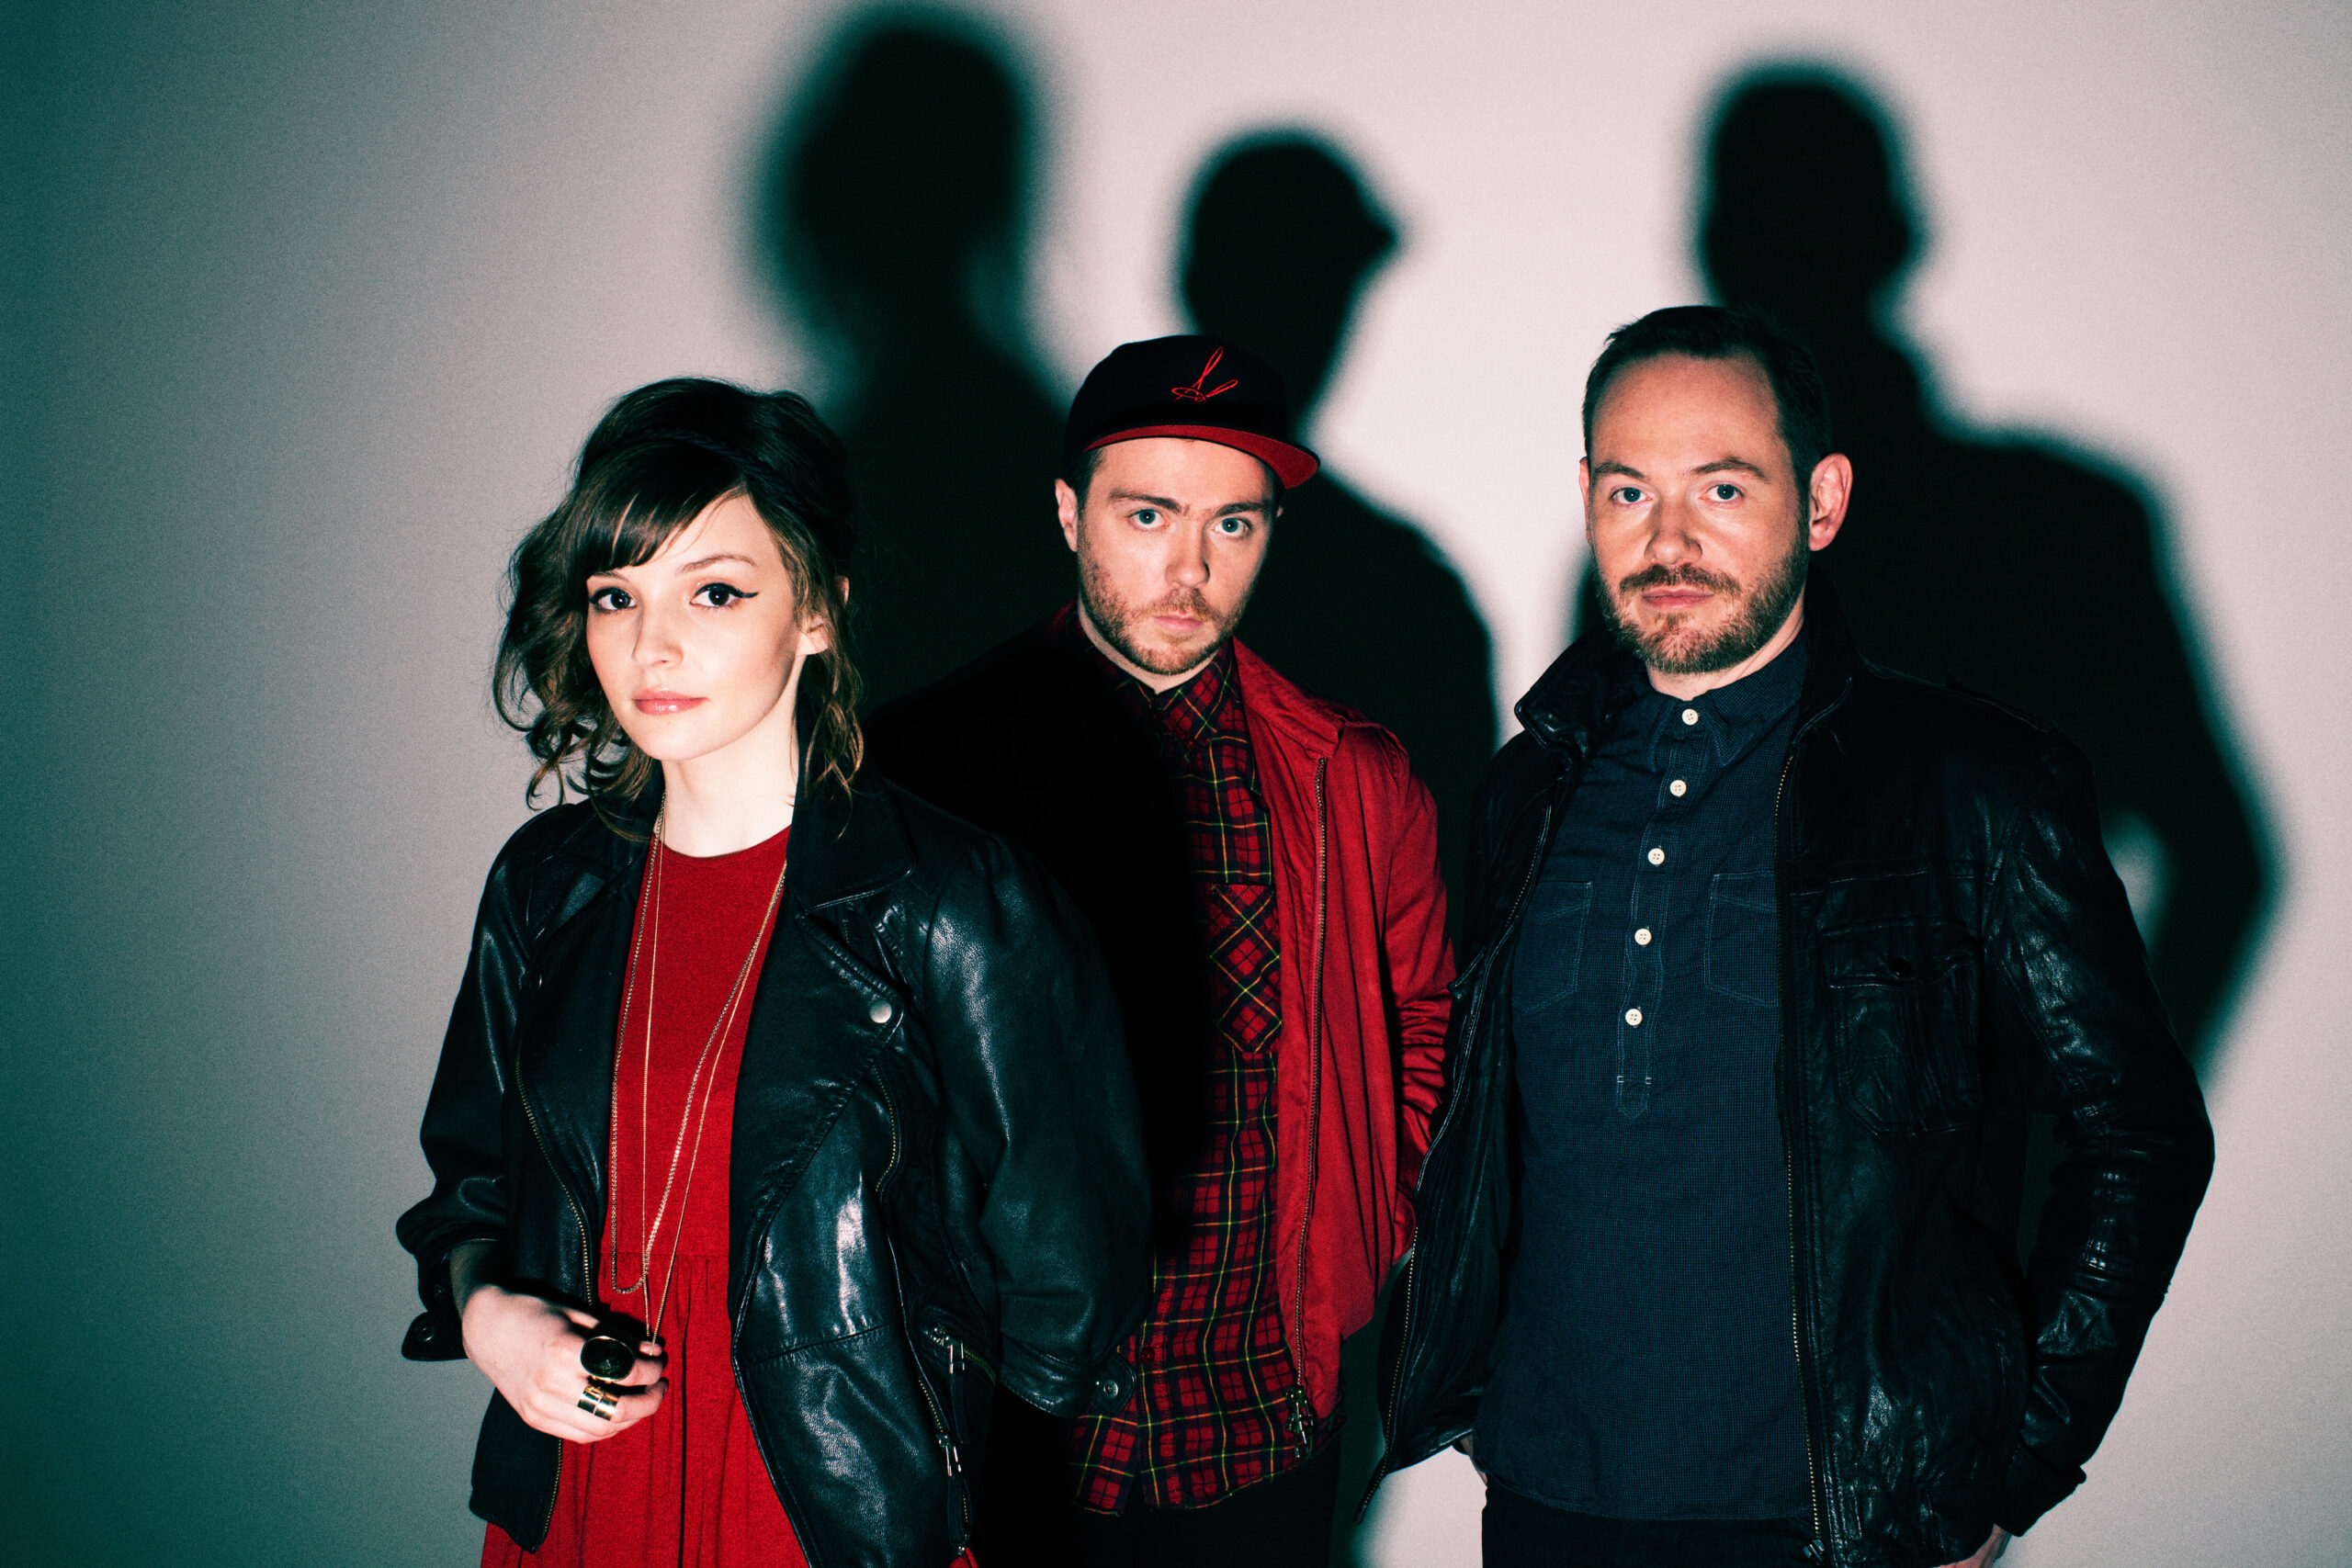 CHVRCHES ‘THE BONES OF WHAT YOU BELIEVE’  10 YEAR ANNIVERSARY SPECIAL EDITION OF THE CRITICALLY ACCLAIMED DEBUT ALBUM DUE 13 OCTOBER